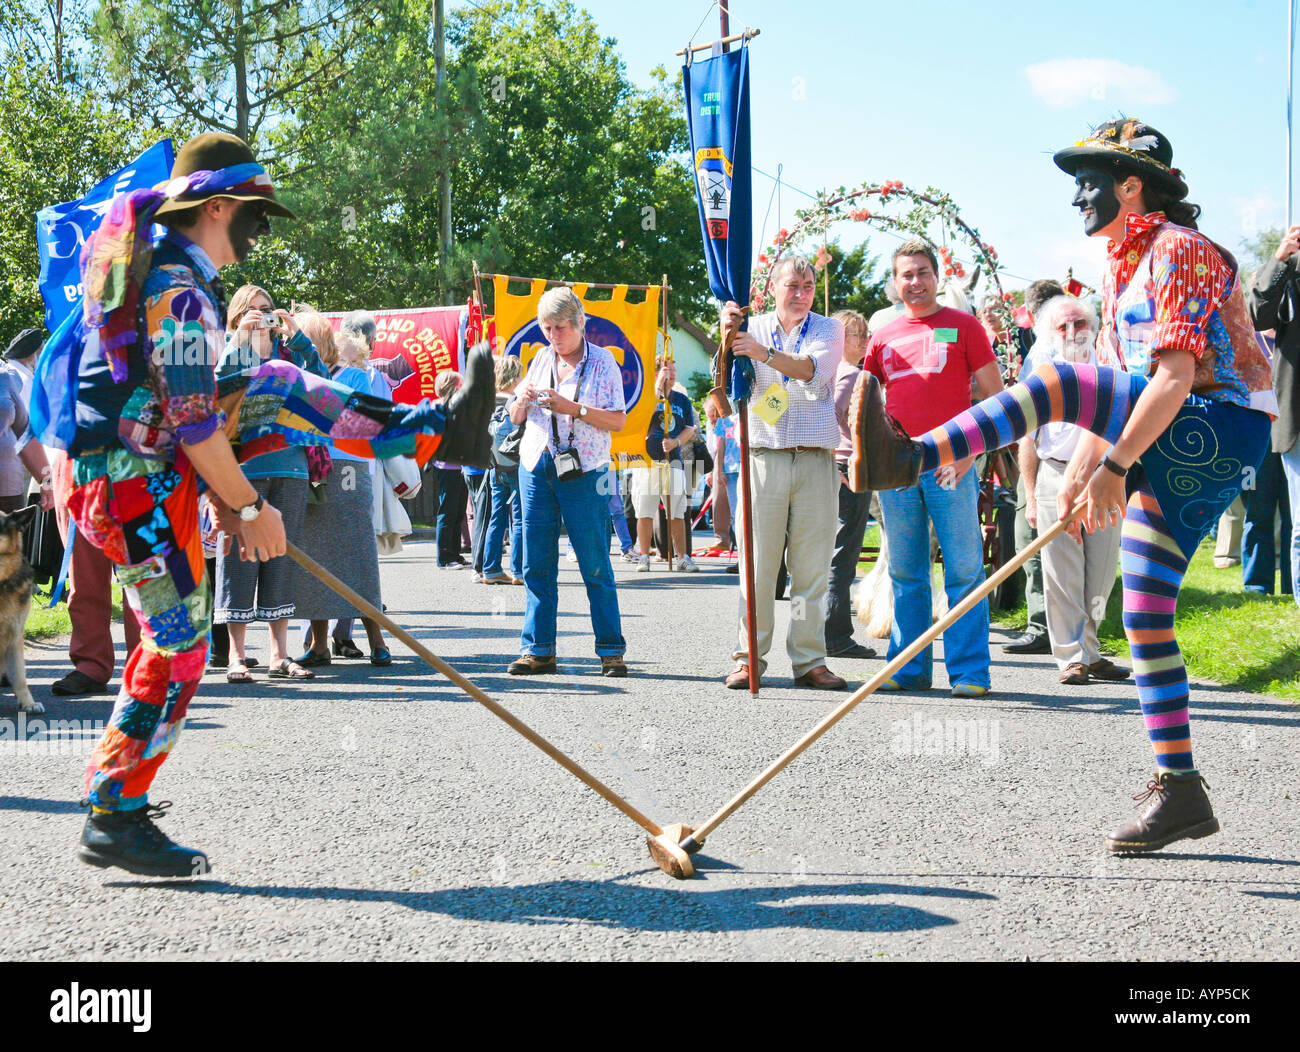 Broom Dance High Resolution Stock Photography and Images - Alamy